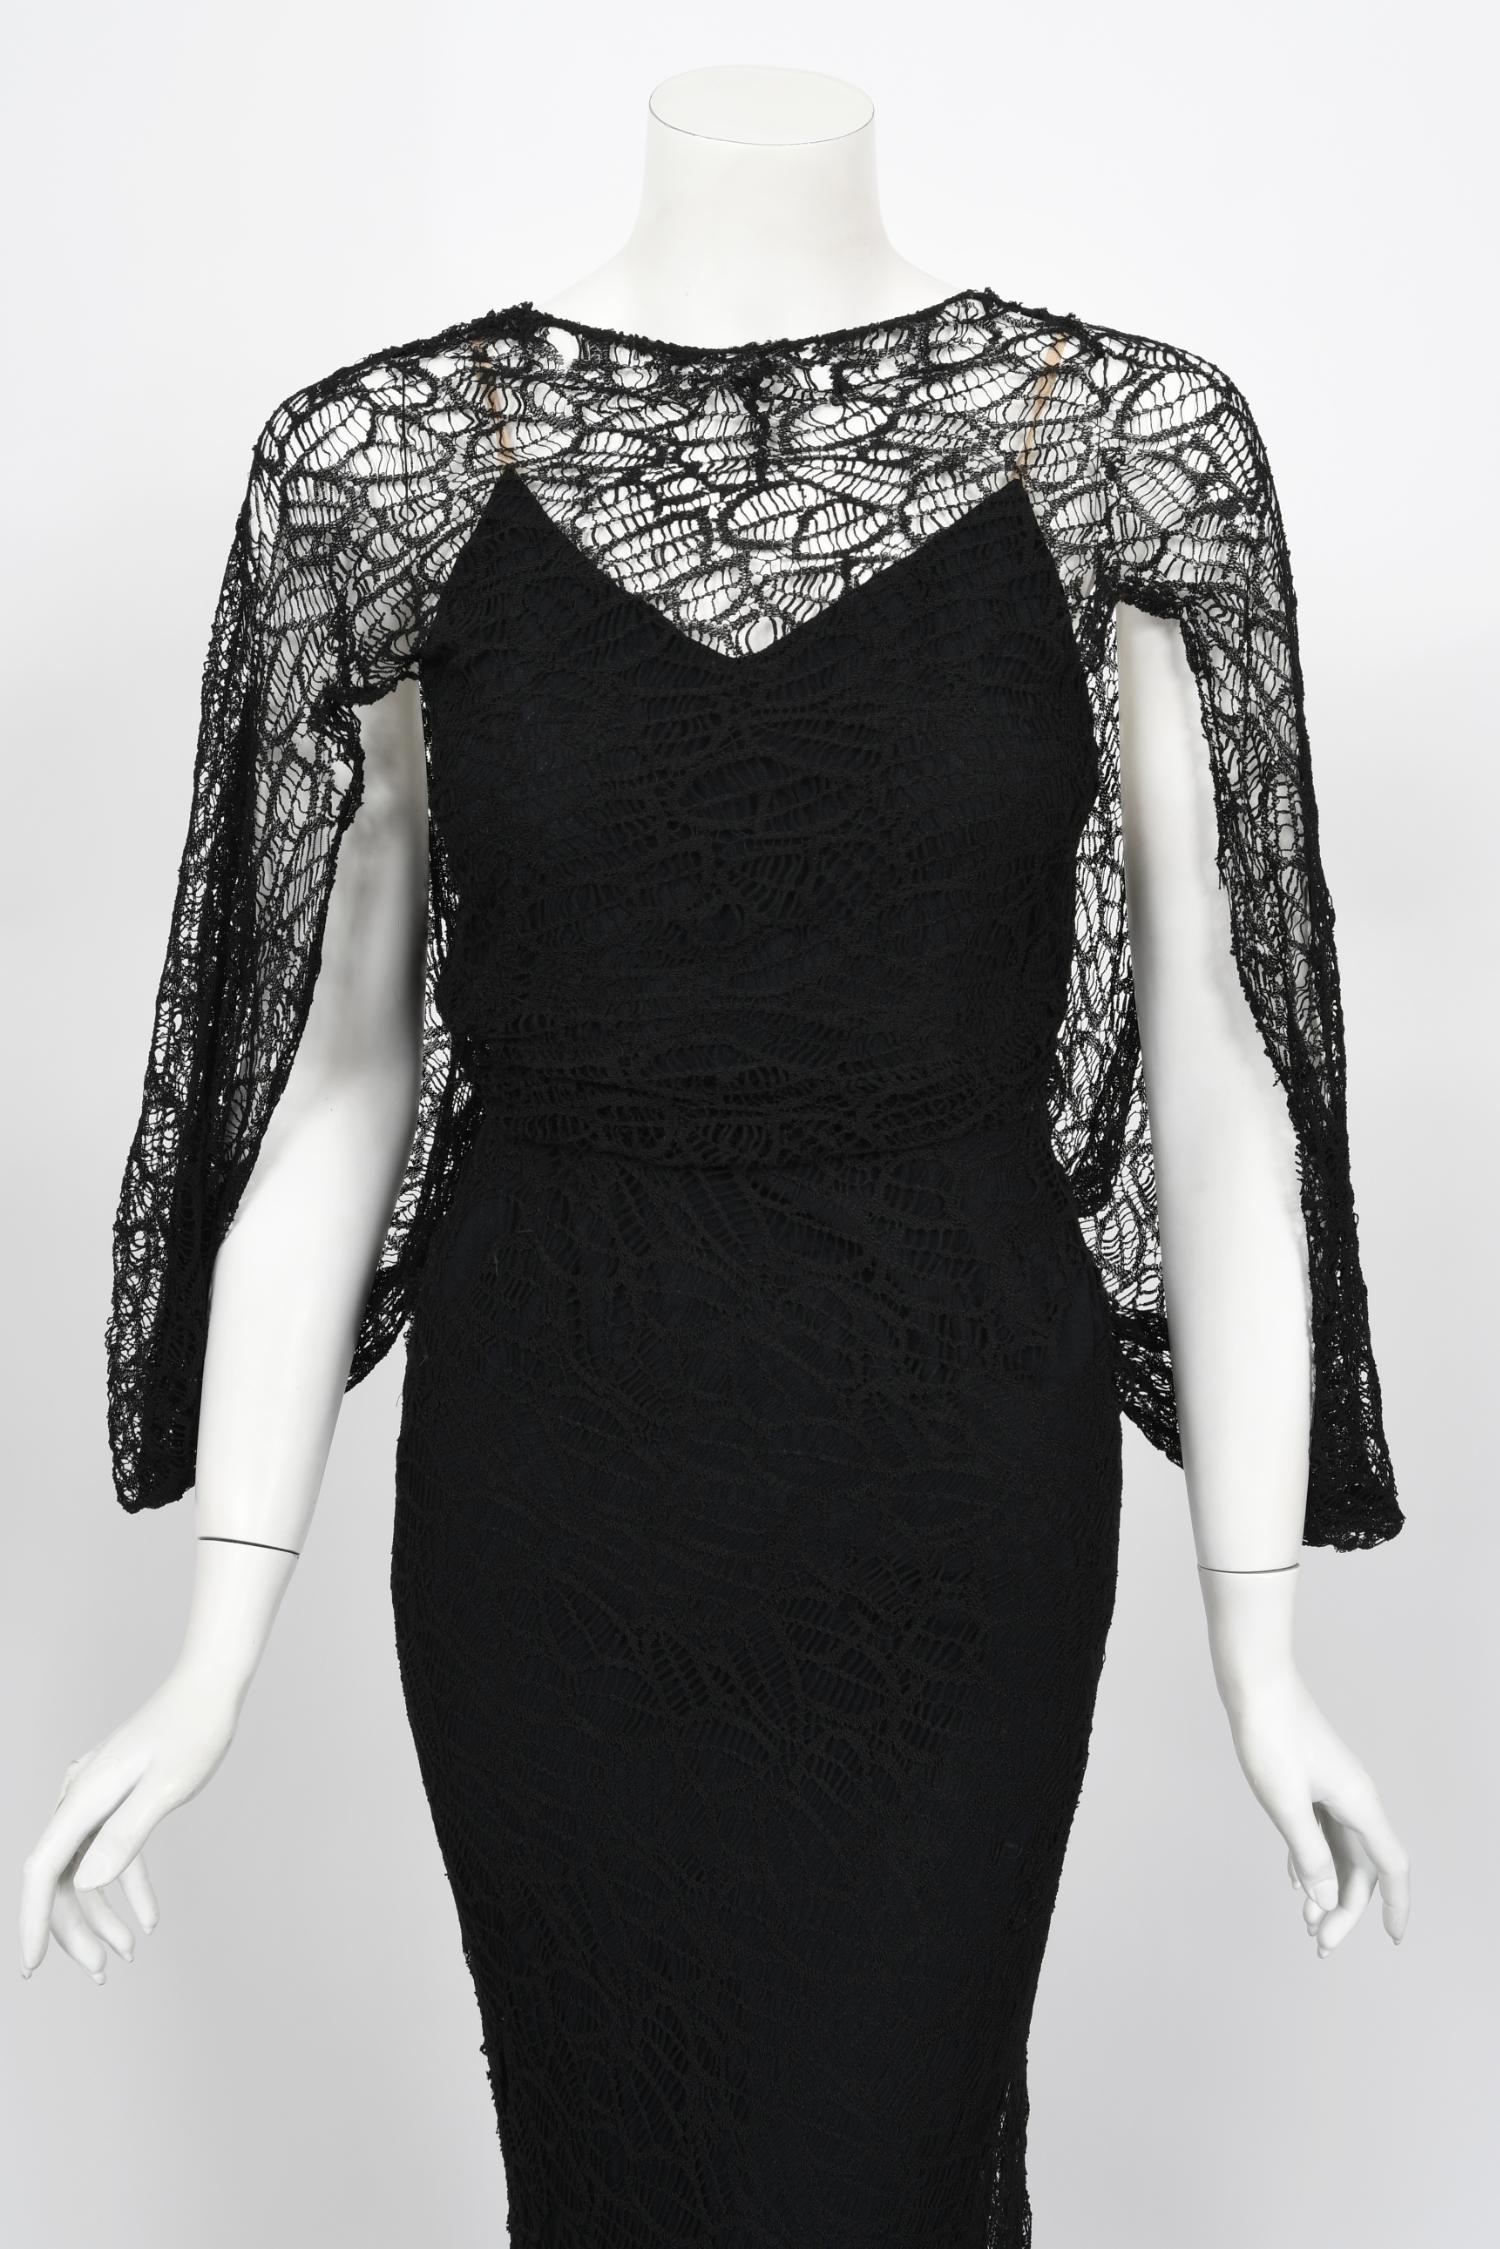 An incredibly rare and absolutely gorgeous Edward Molyneux black leaf-motif lace bias-cut gown dating back to the mid 1930's. This breathtaking museum worth black dress was a custom commission by Eleanor Jerusha Lawler Pillsbury. After a period